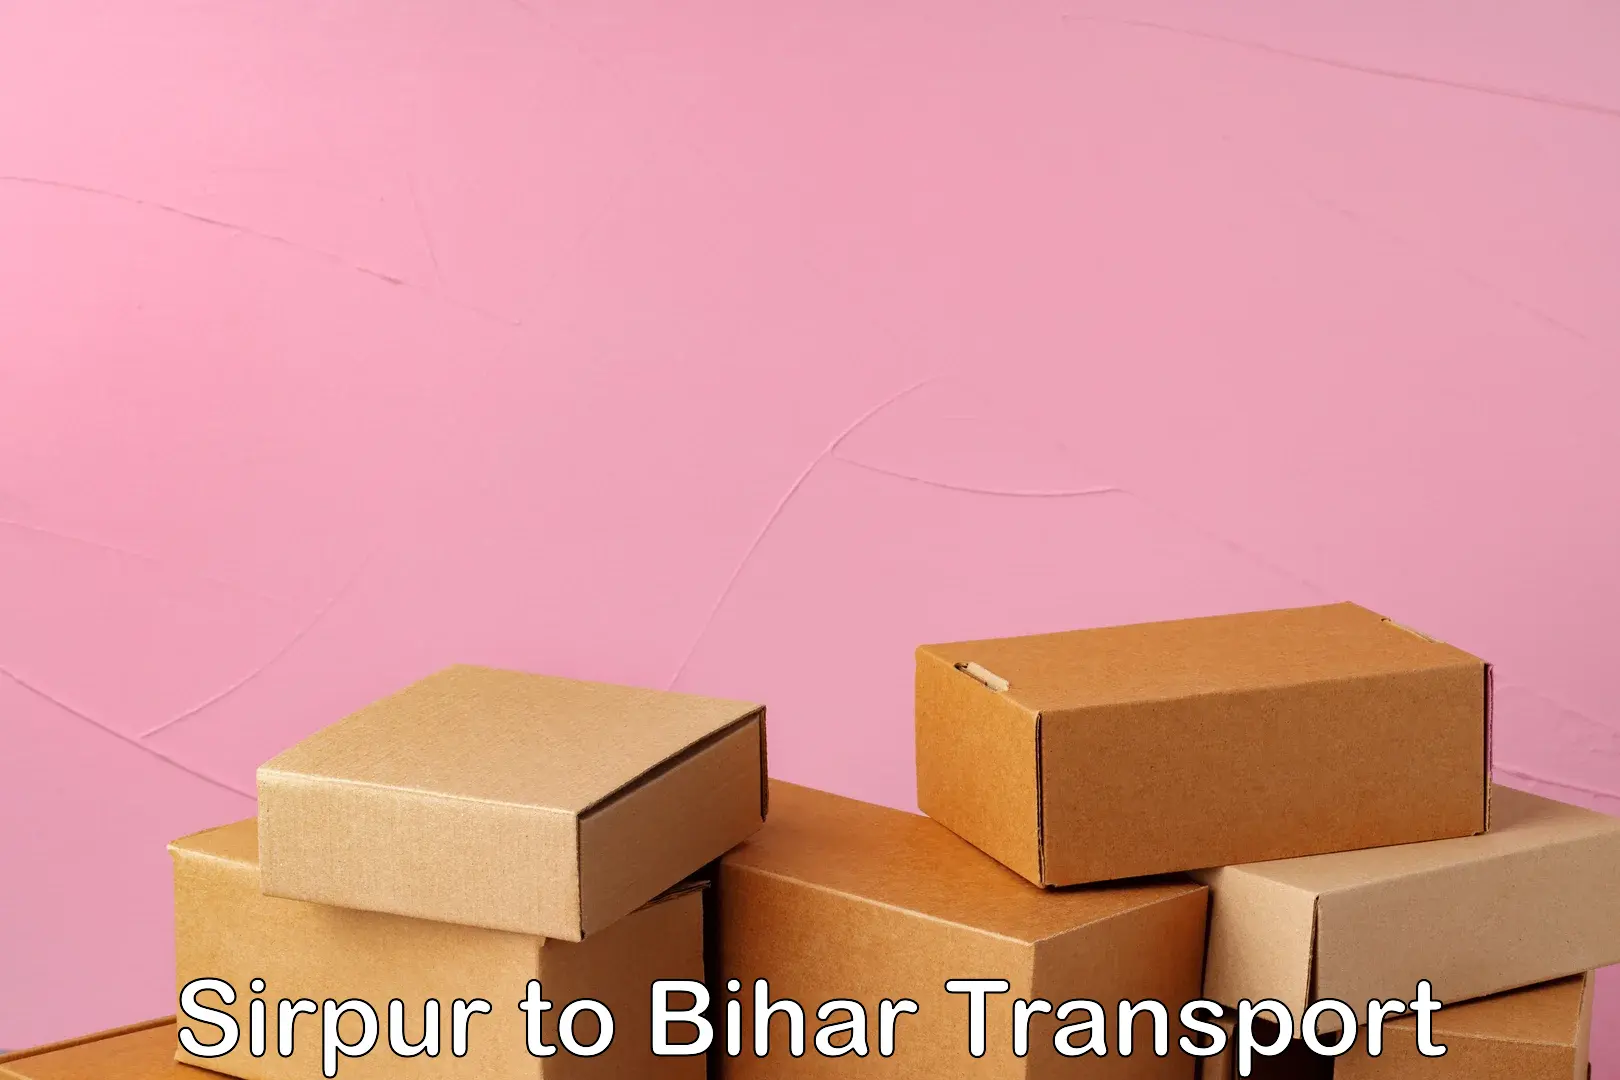 Nationwide transport services Sirpur to Bihar